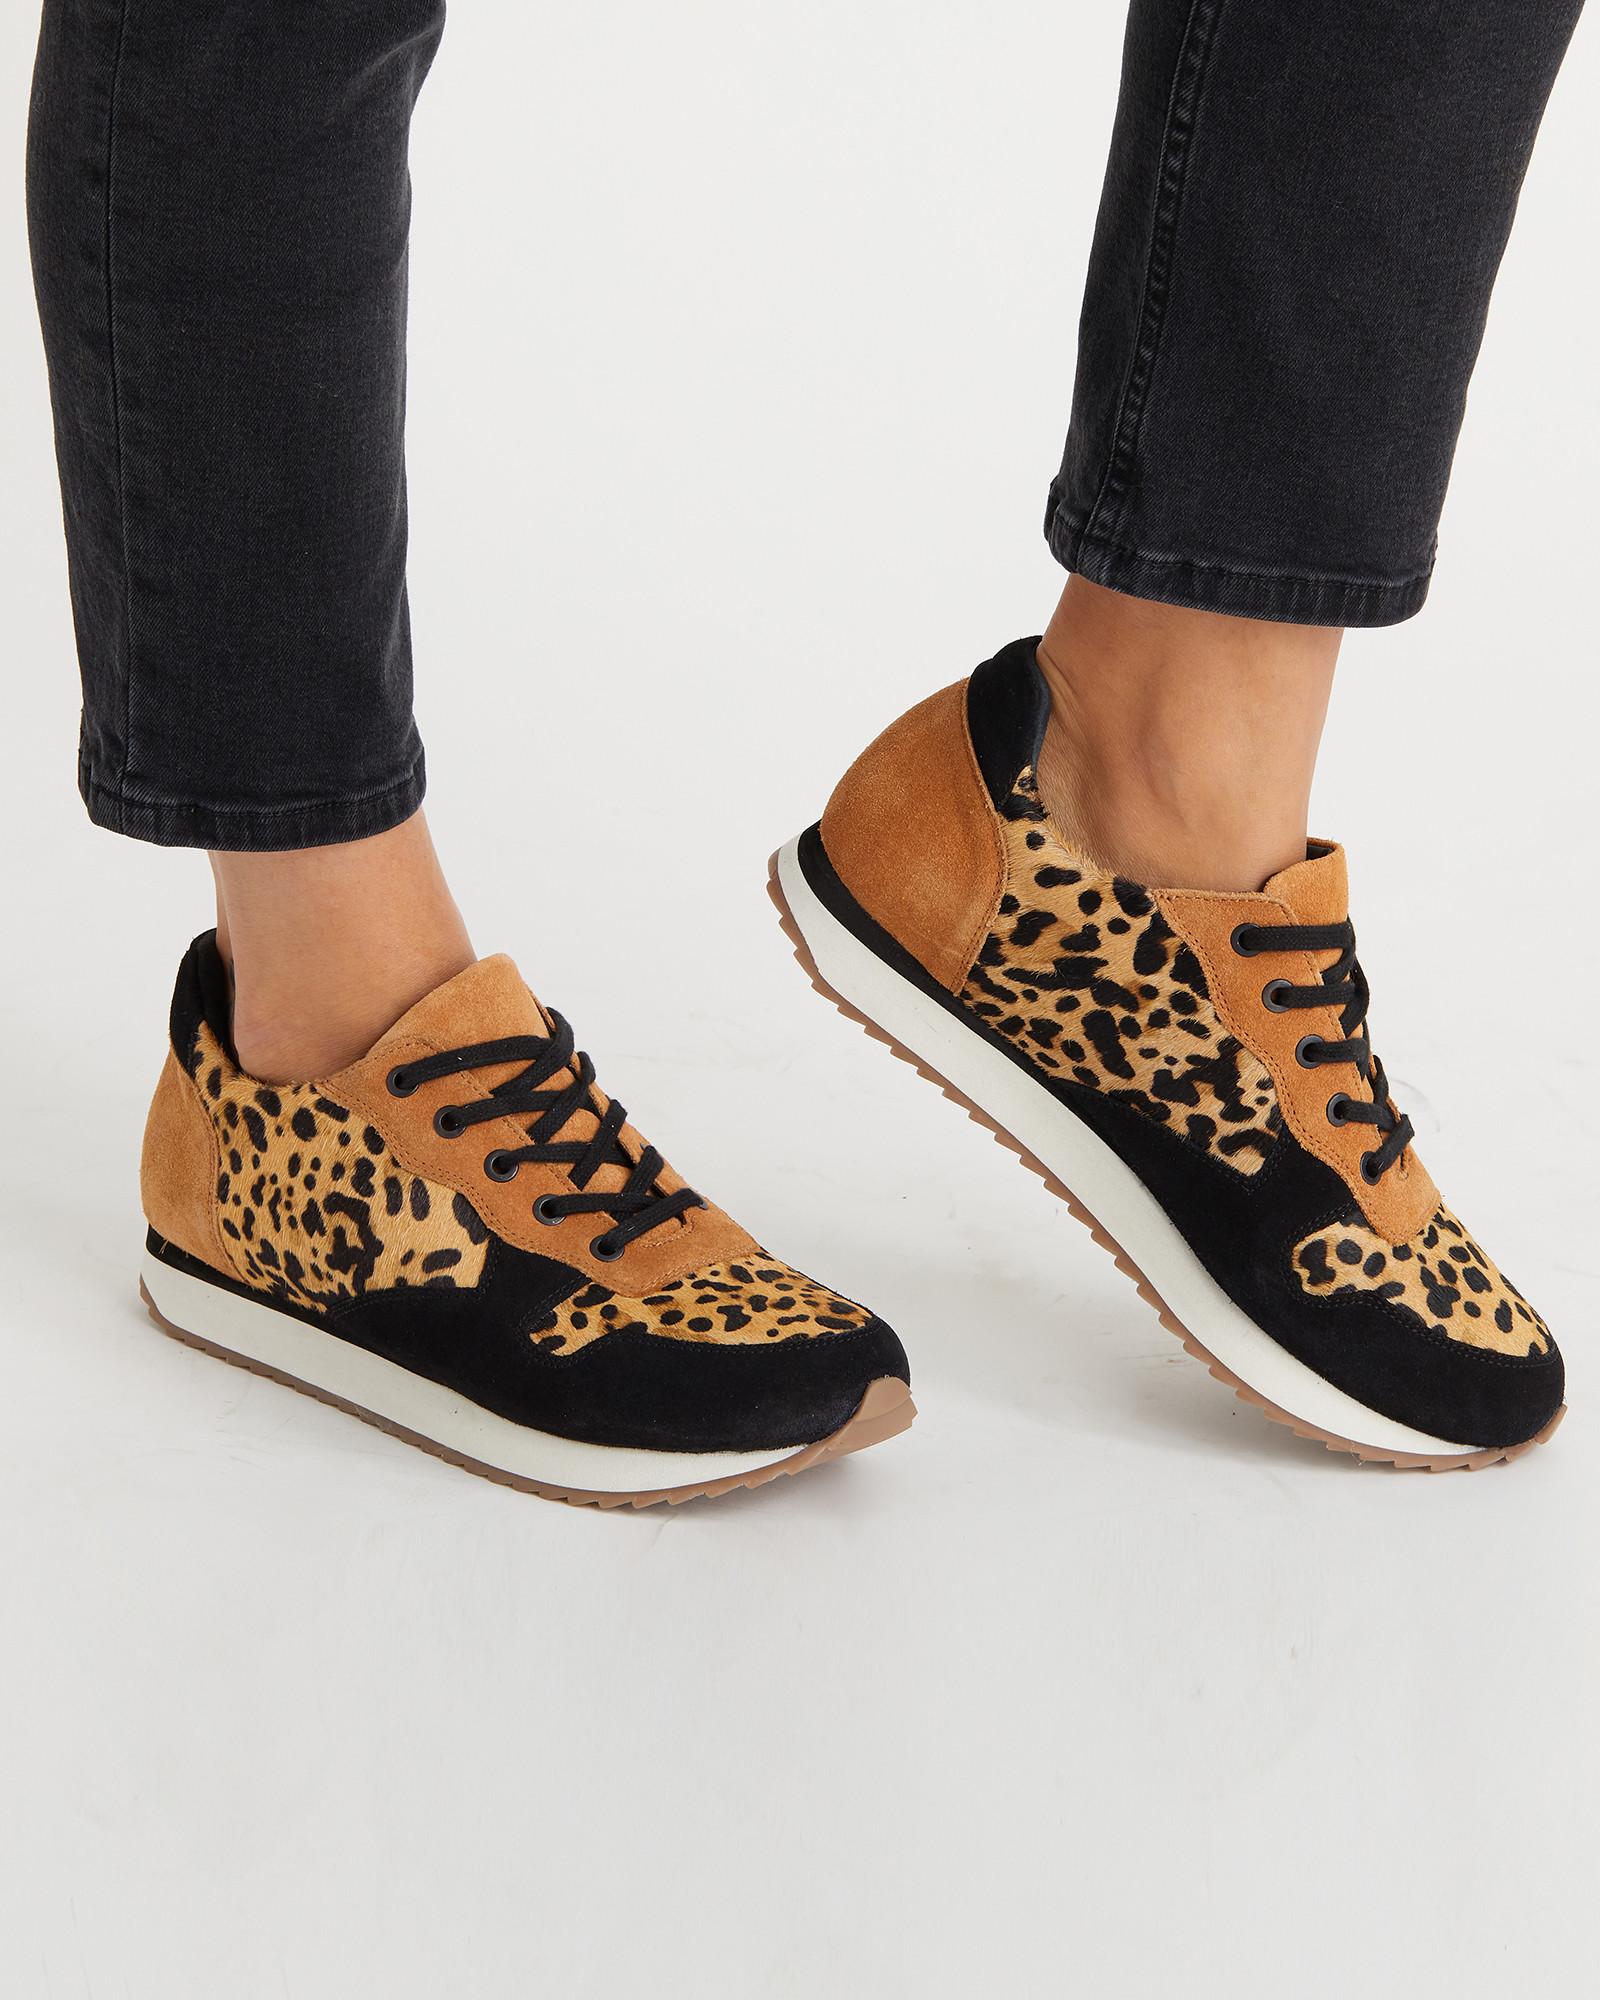 Oliver Bonas Animal Print Brown Leather Lace Up Trainers in Black - Lyst